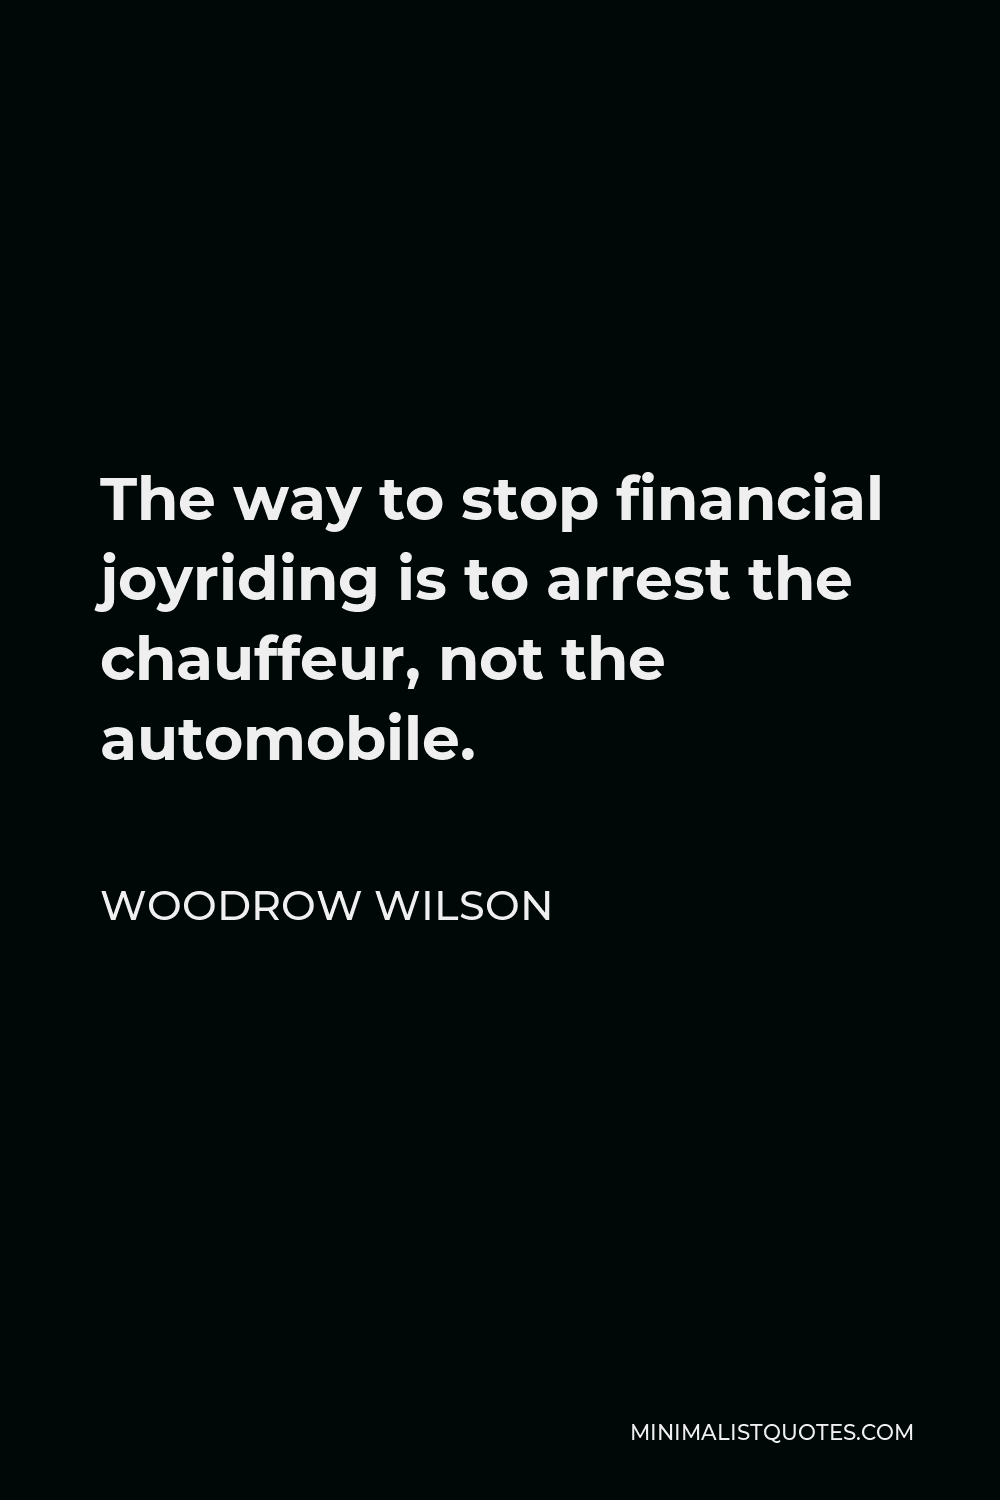 Woodrow Wilson Quote - The way to stop financial joyriding is to arrest the chauffeur, not the automobile.